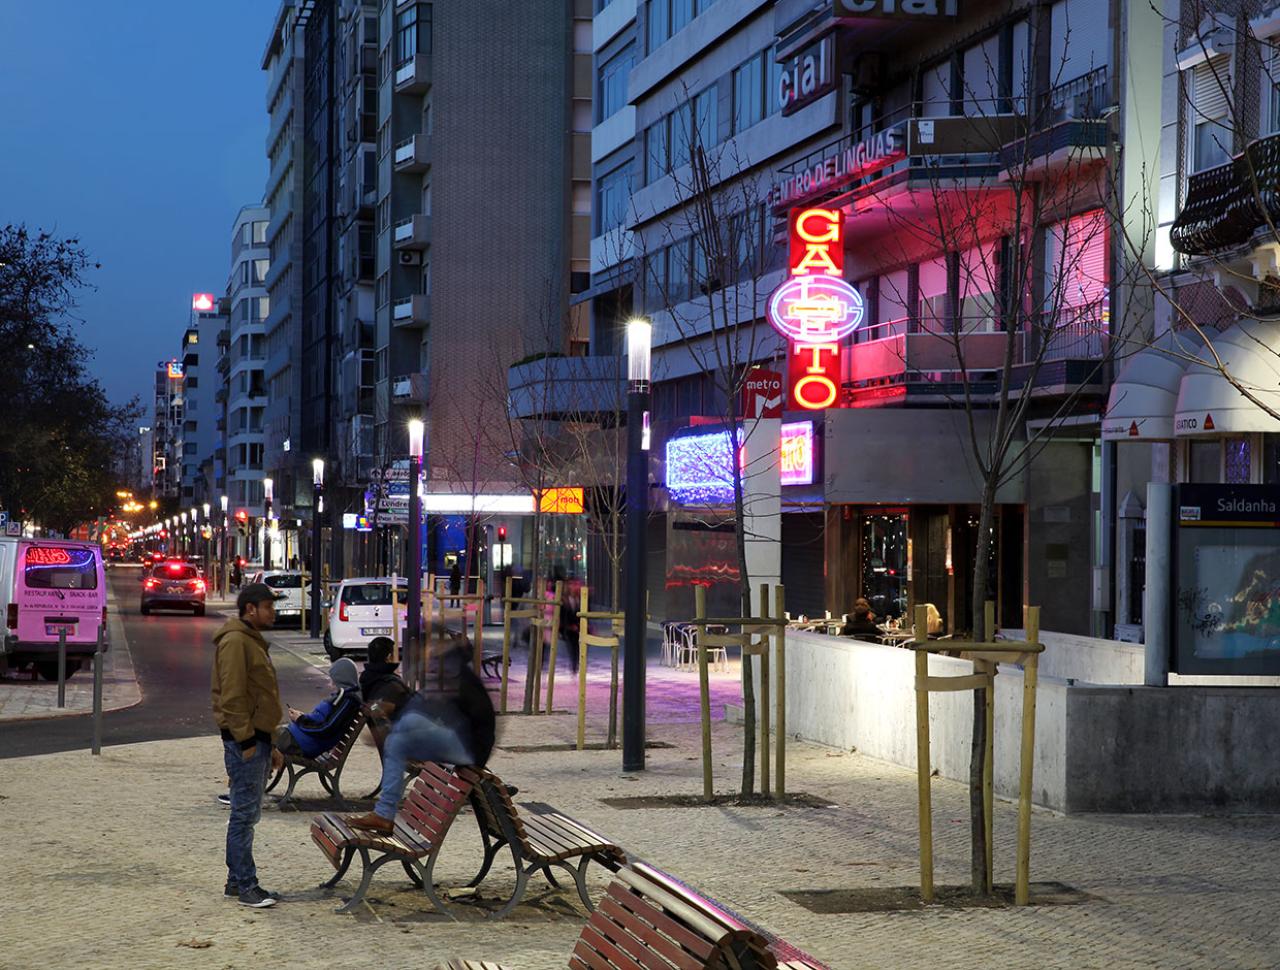 LED lighting systems can help improve the mobile experience in cities